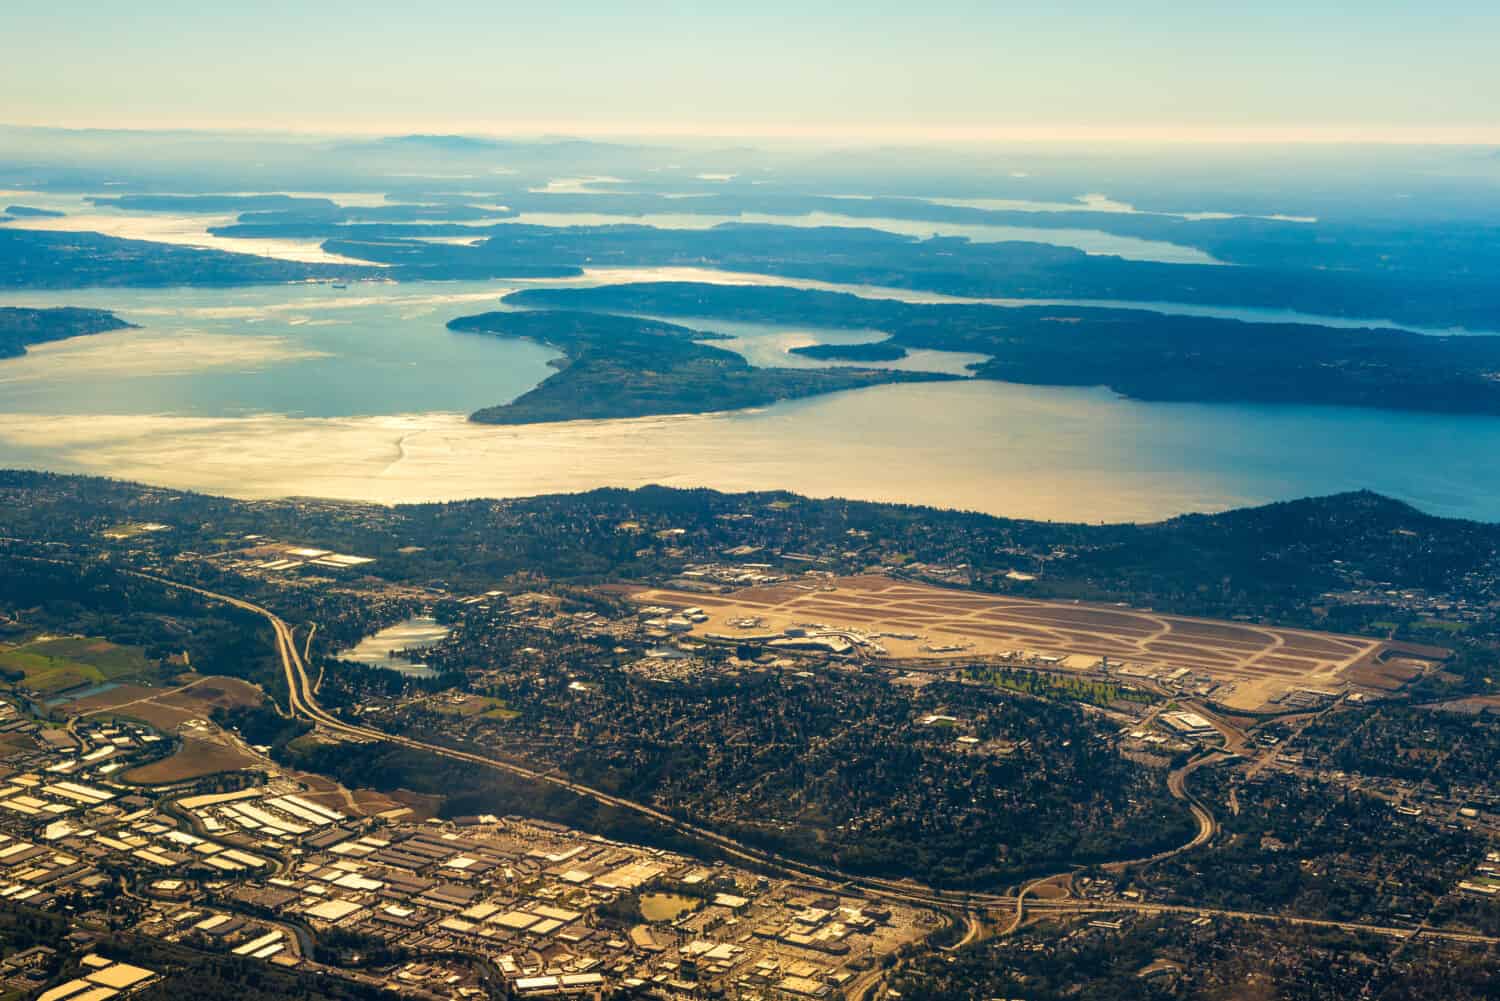 Seattle-Tacoma International Airport from the air with the southern end of Puget Sound in late afternoon light